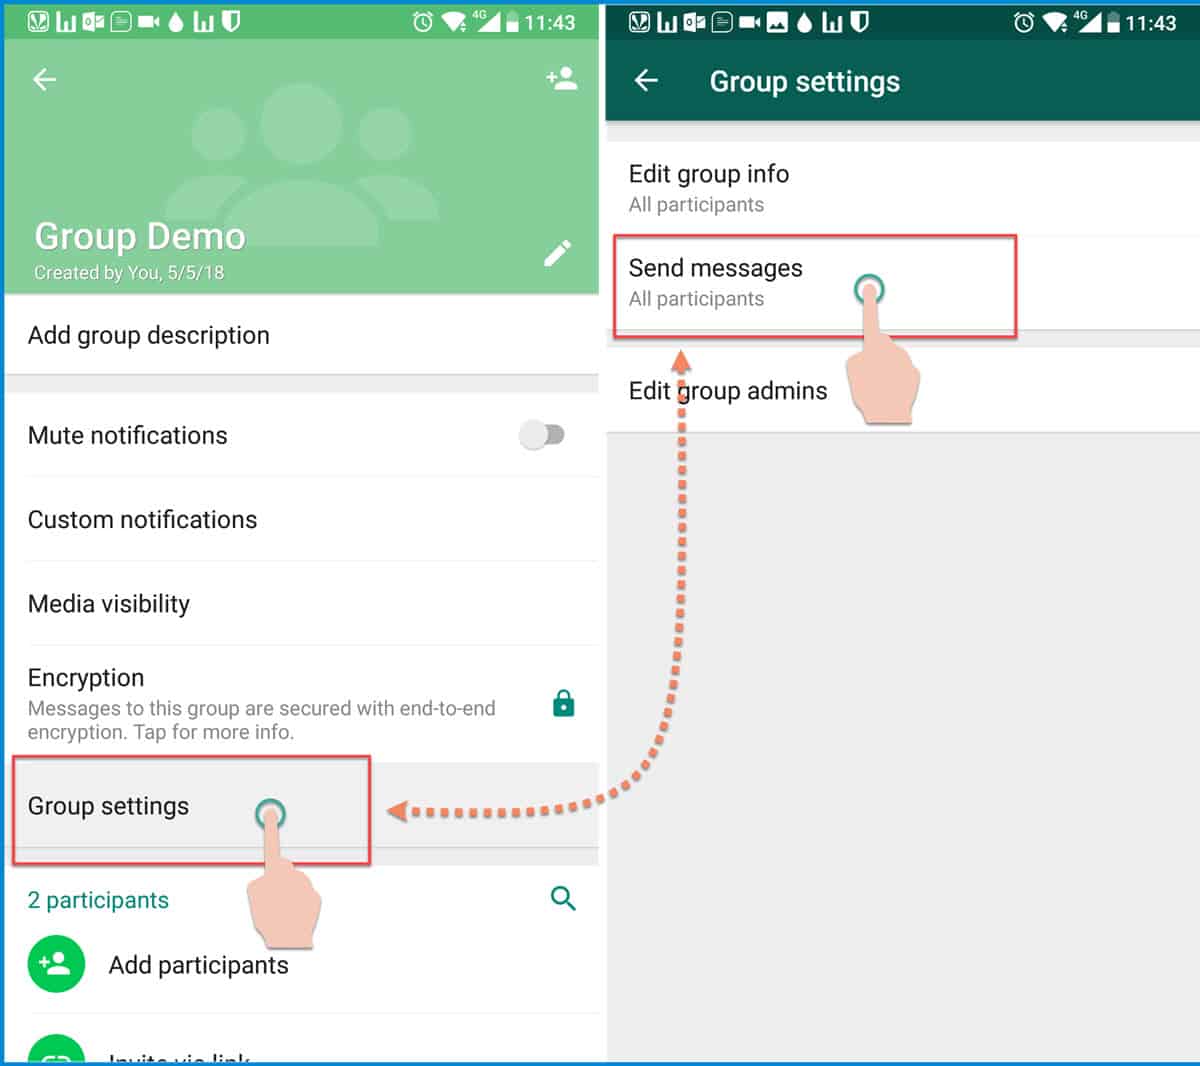 WhatsApp group settings for Send messages permission